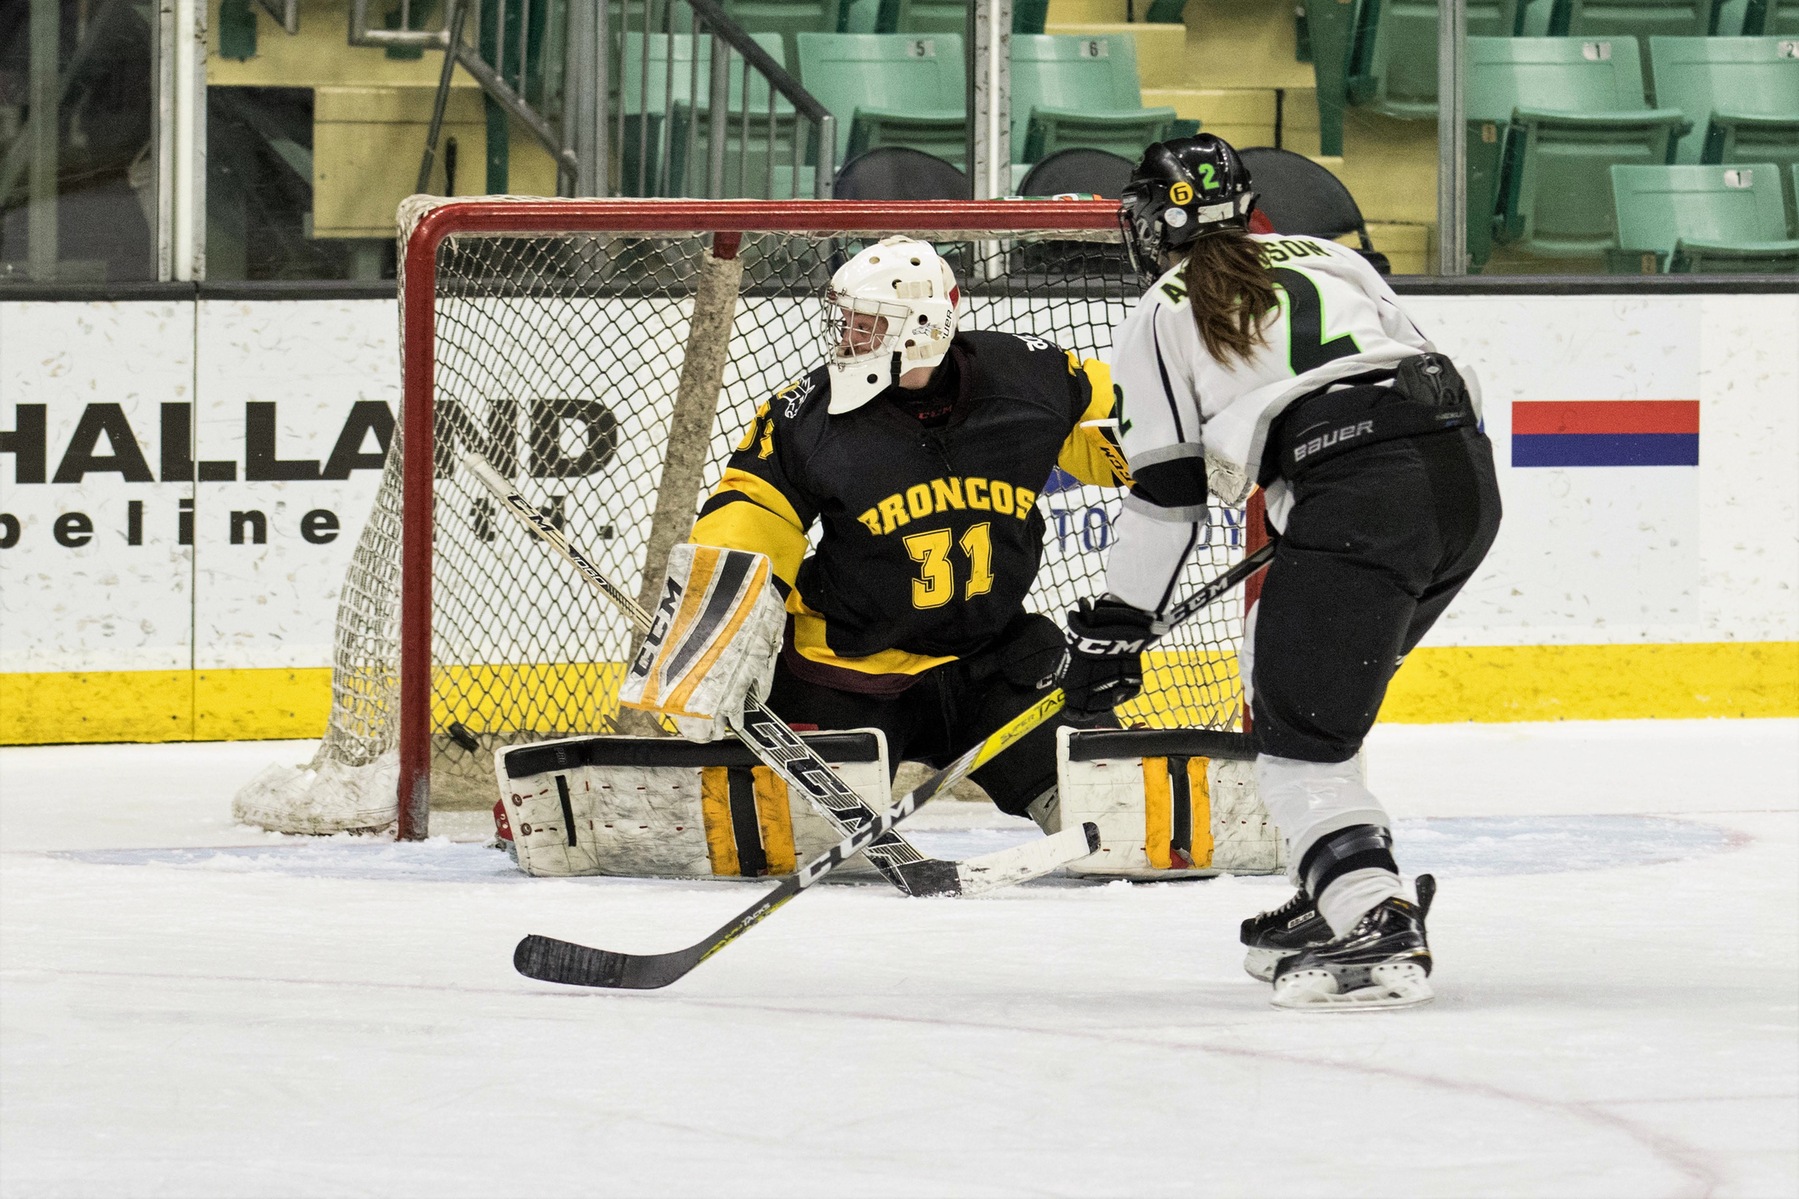 Cassidy Anderson (2) scored shorthanded to give the Queens a 3-0 lead. Photo - Tony Hansen